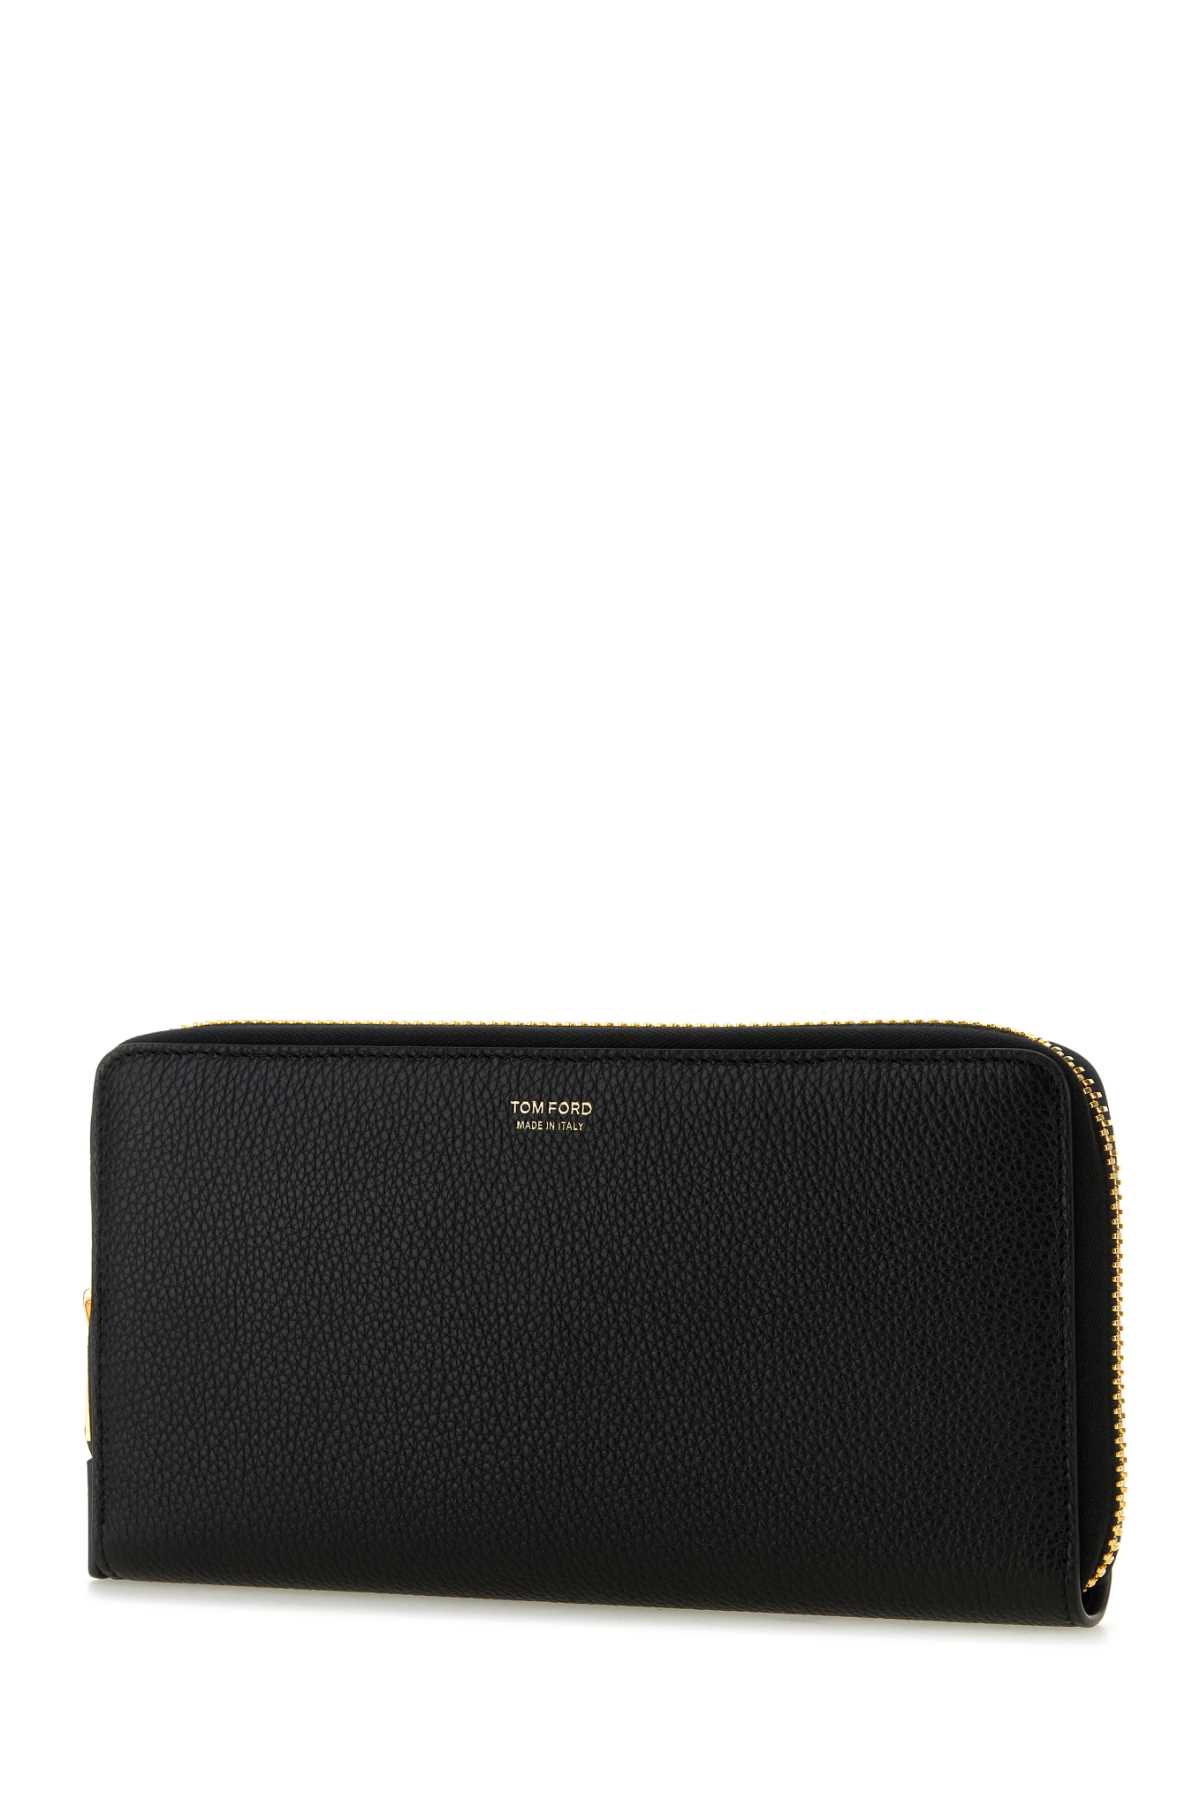 Tom Ford Black Leather Document Case